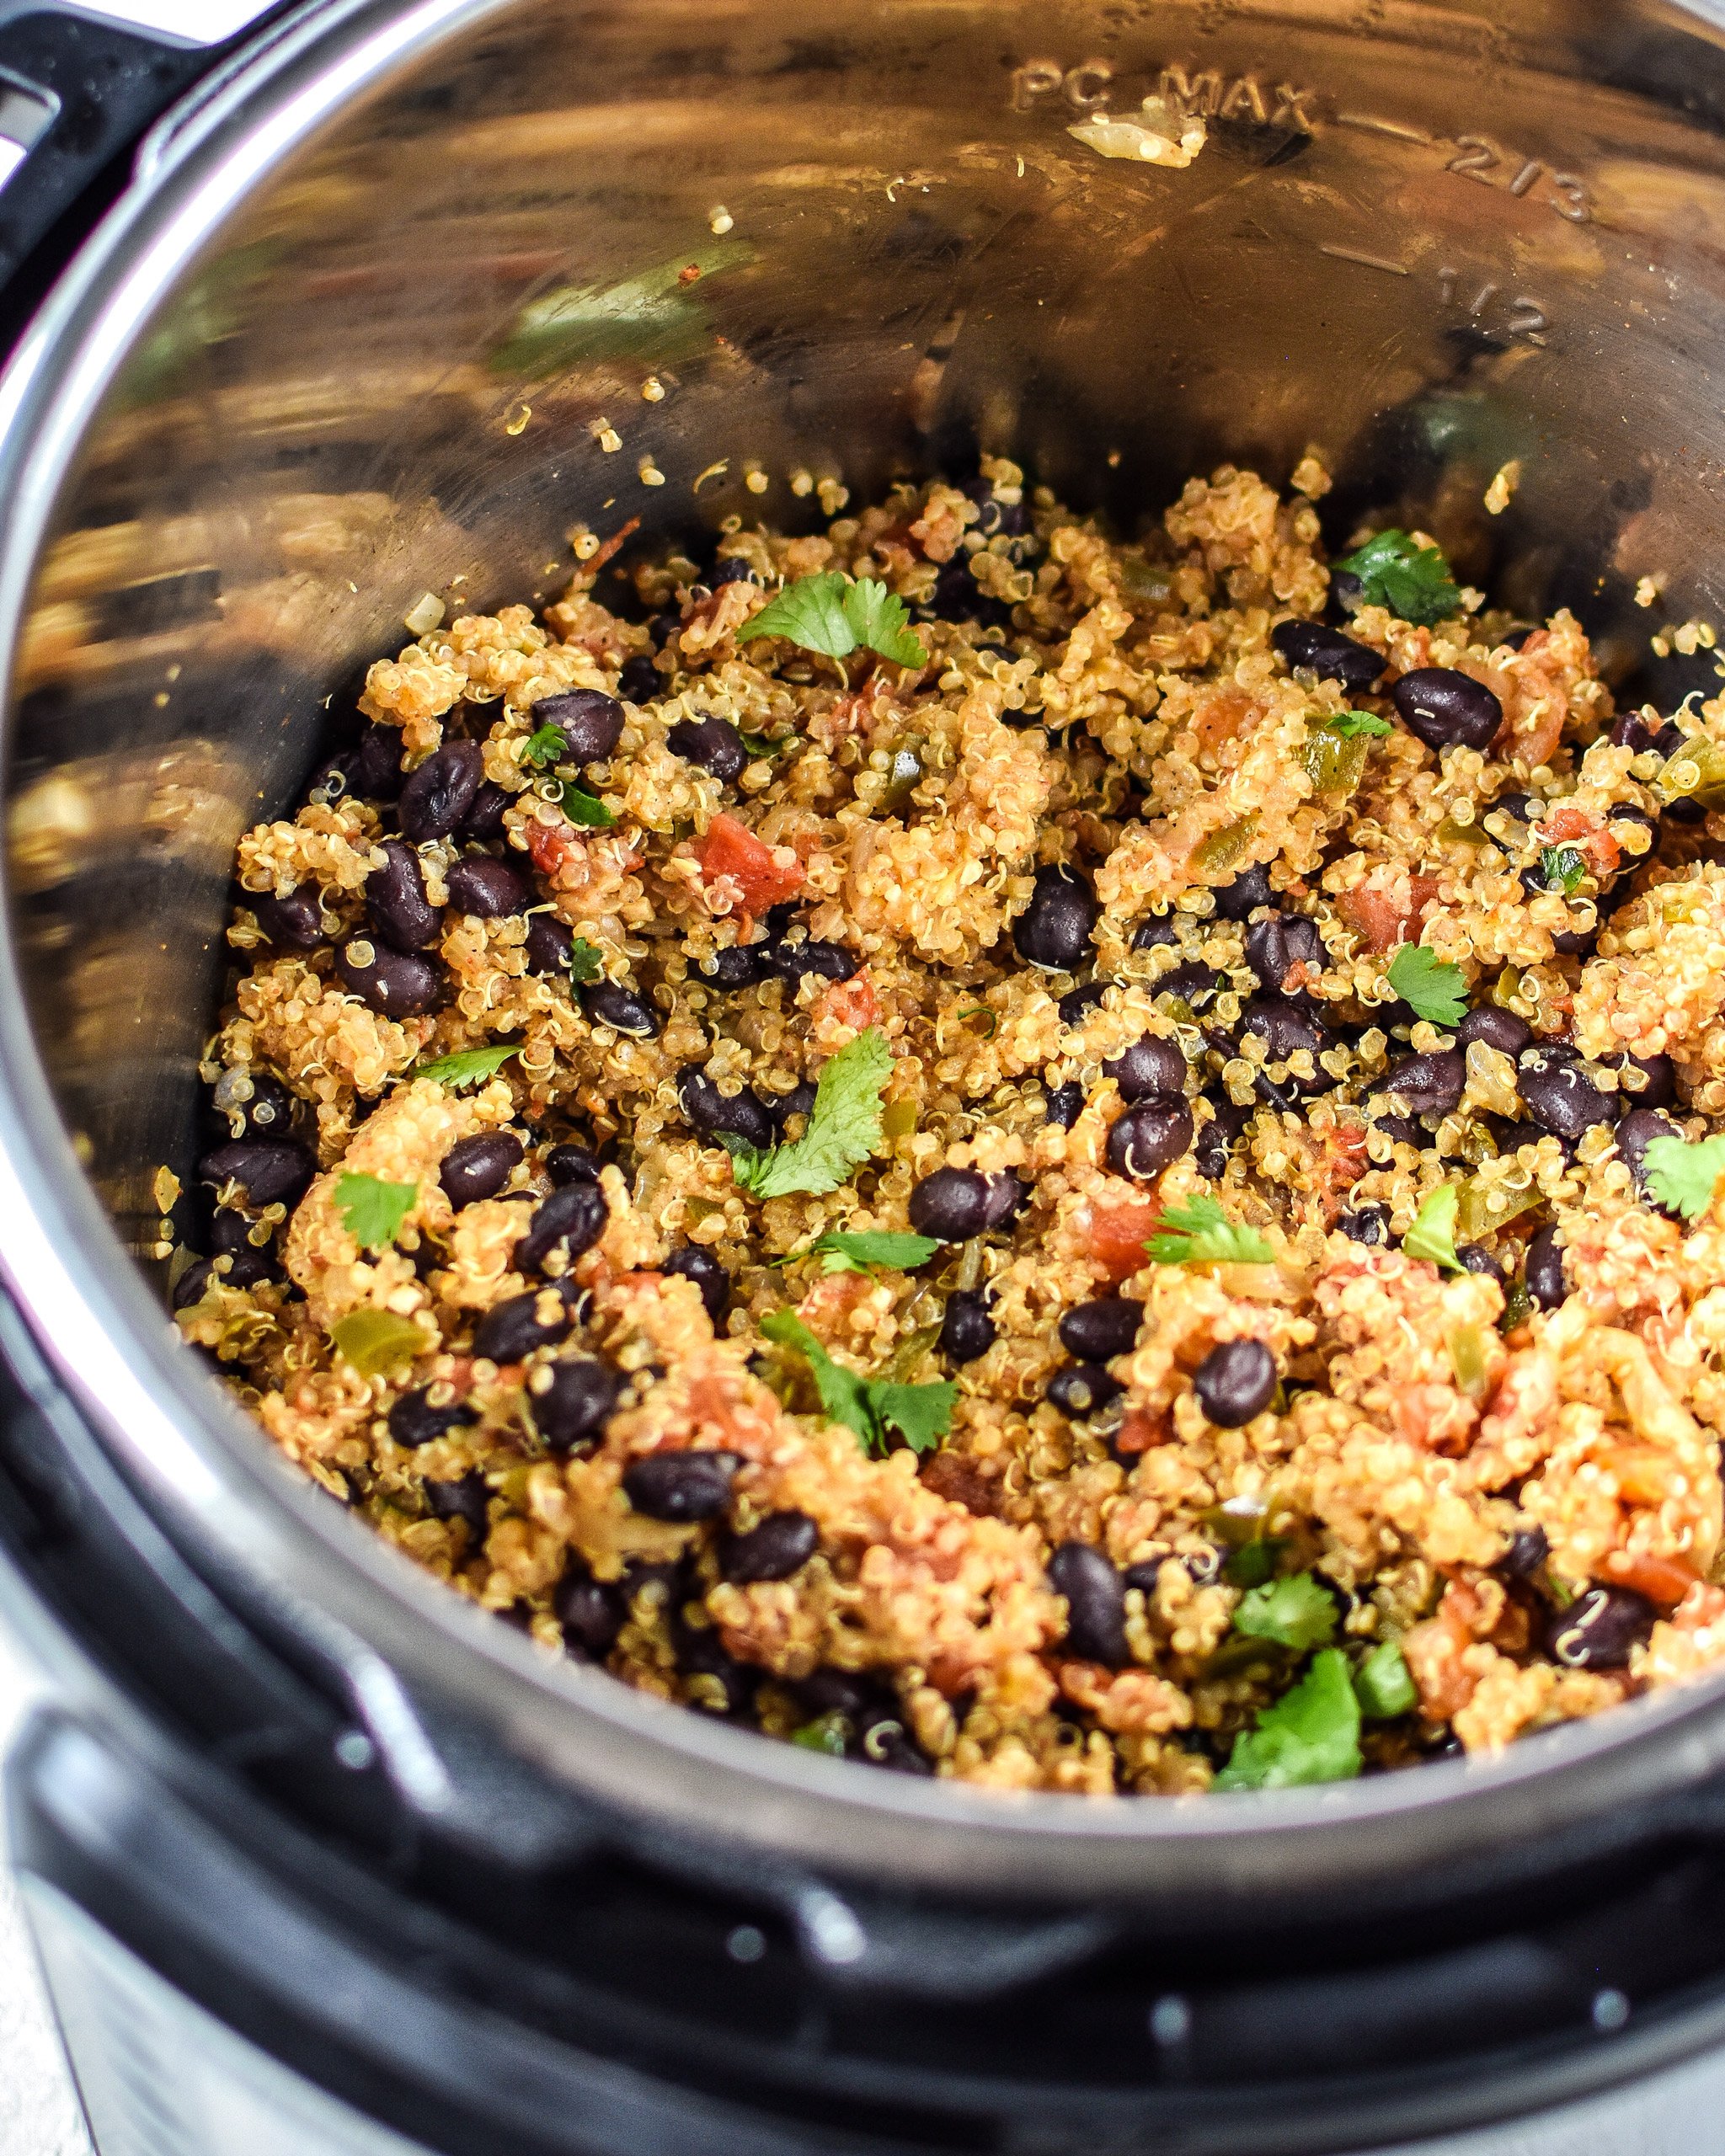 Cooked Mexican quinoa with black beans and cilantro in an Instant Pot.